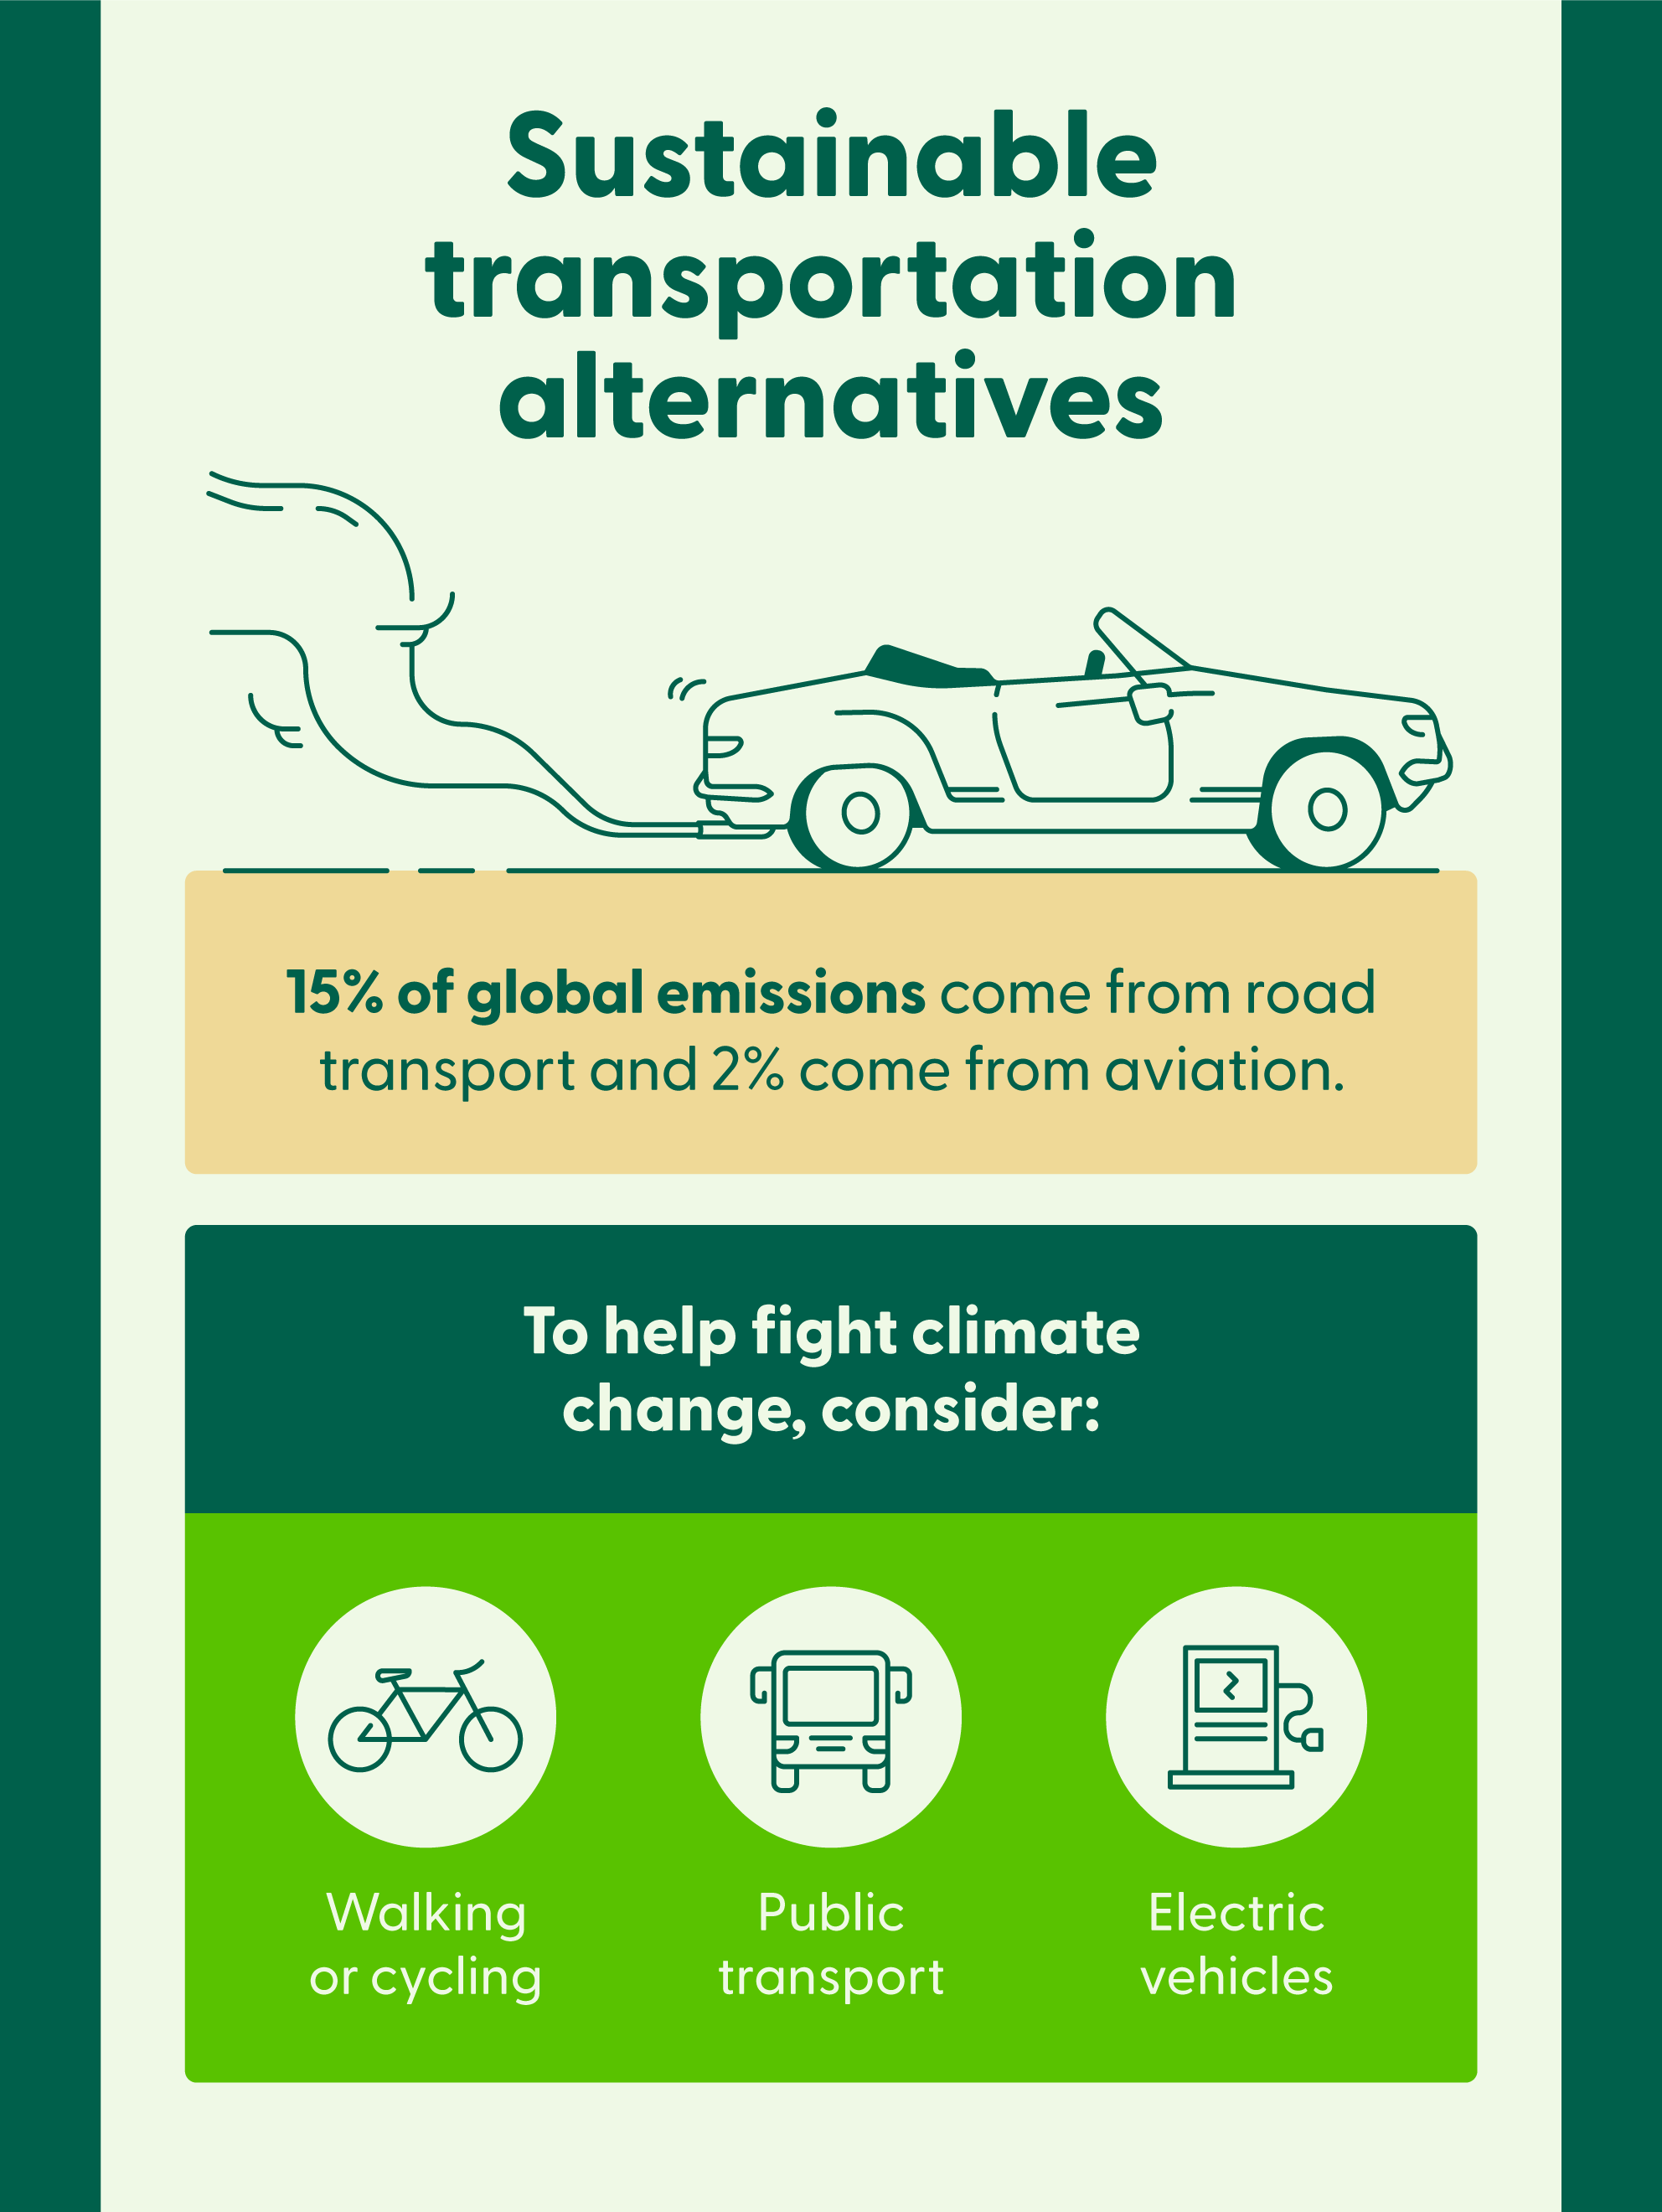 An illustrated car with gas emissions coming out of the back as it drives accompanies a list of three climate-friendly transportation alternatives. 